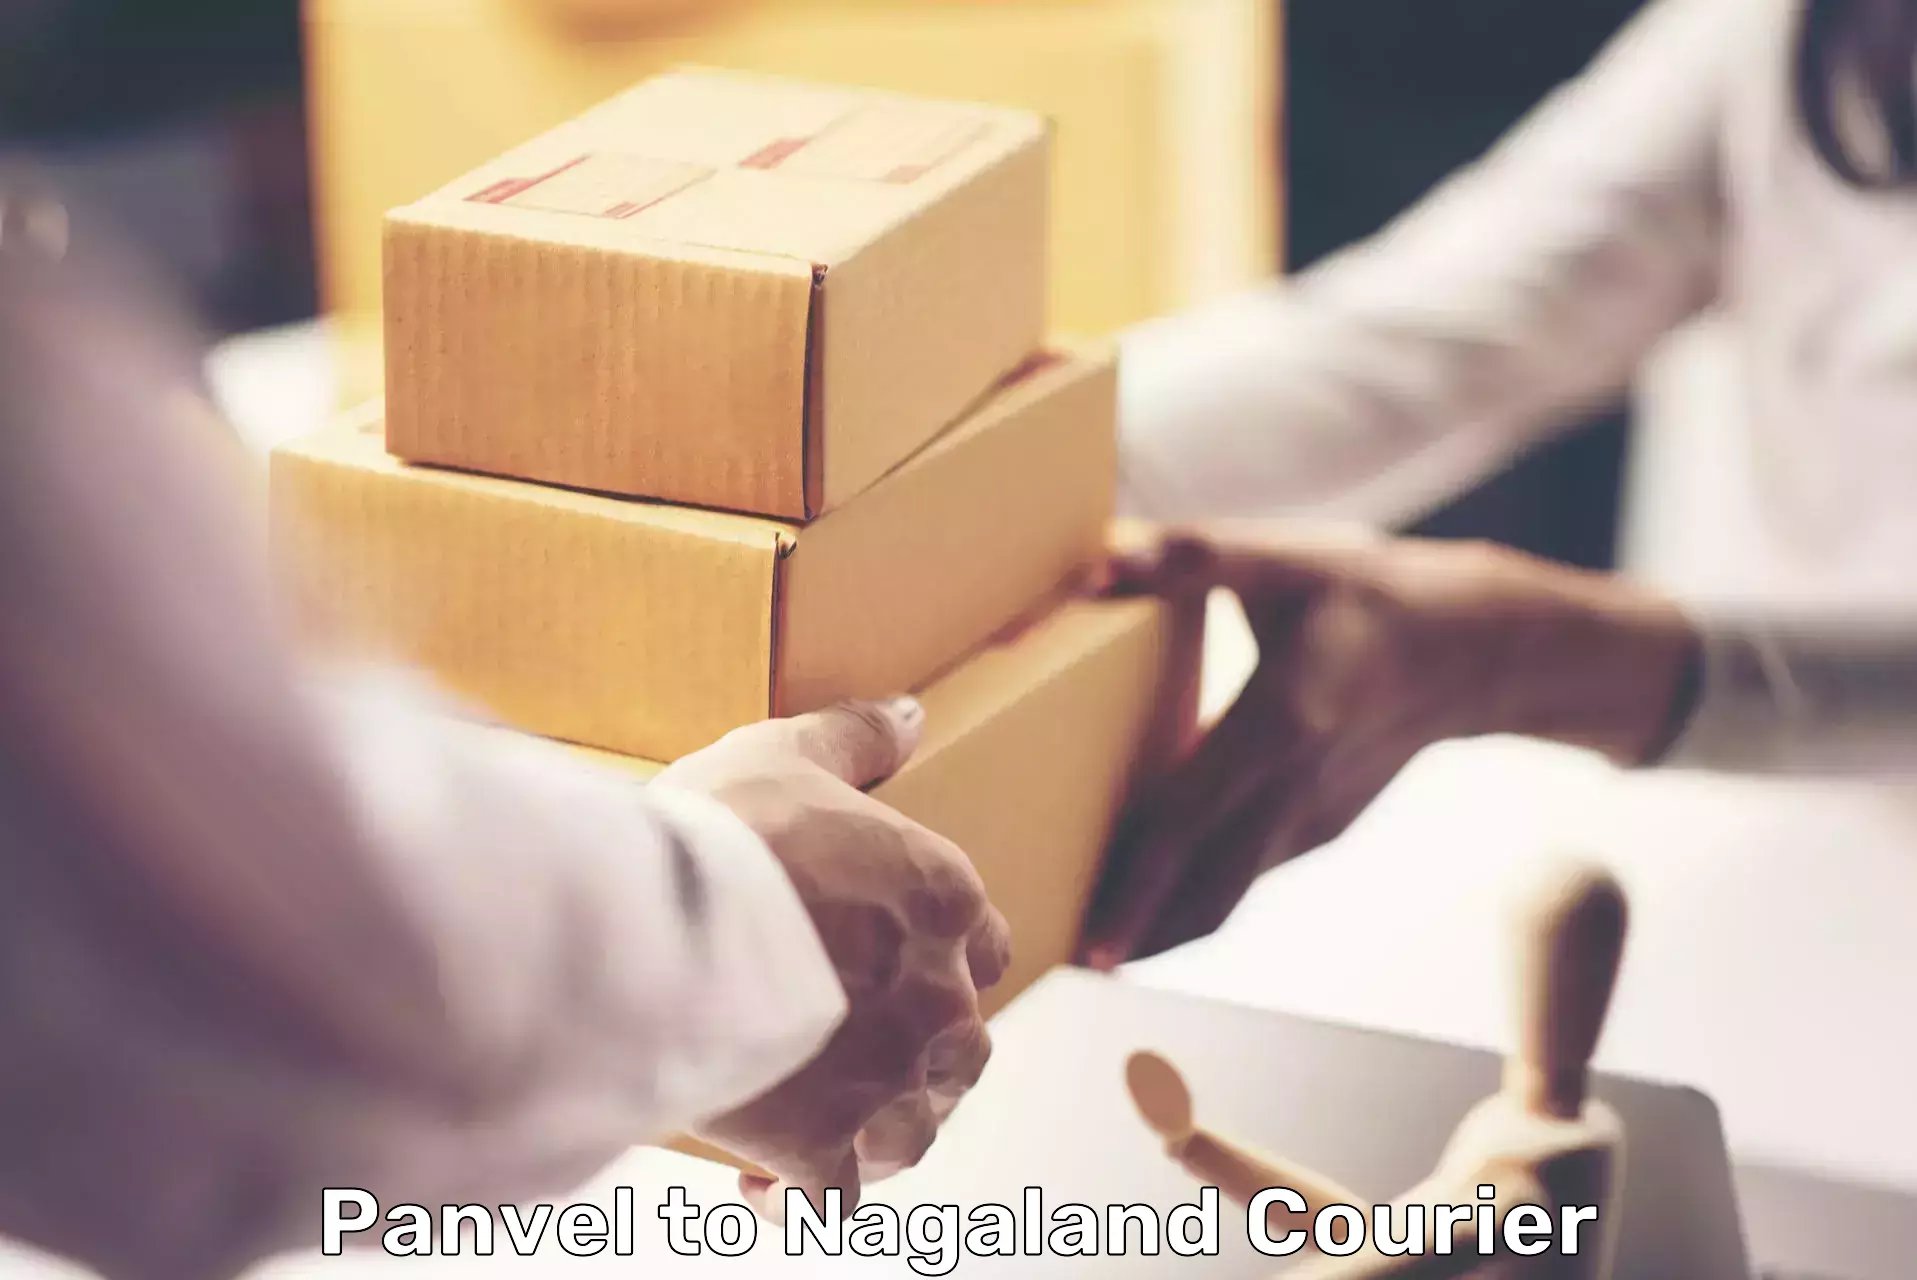 Customer-centric shipping in Panvel to Nagaland